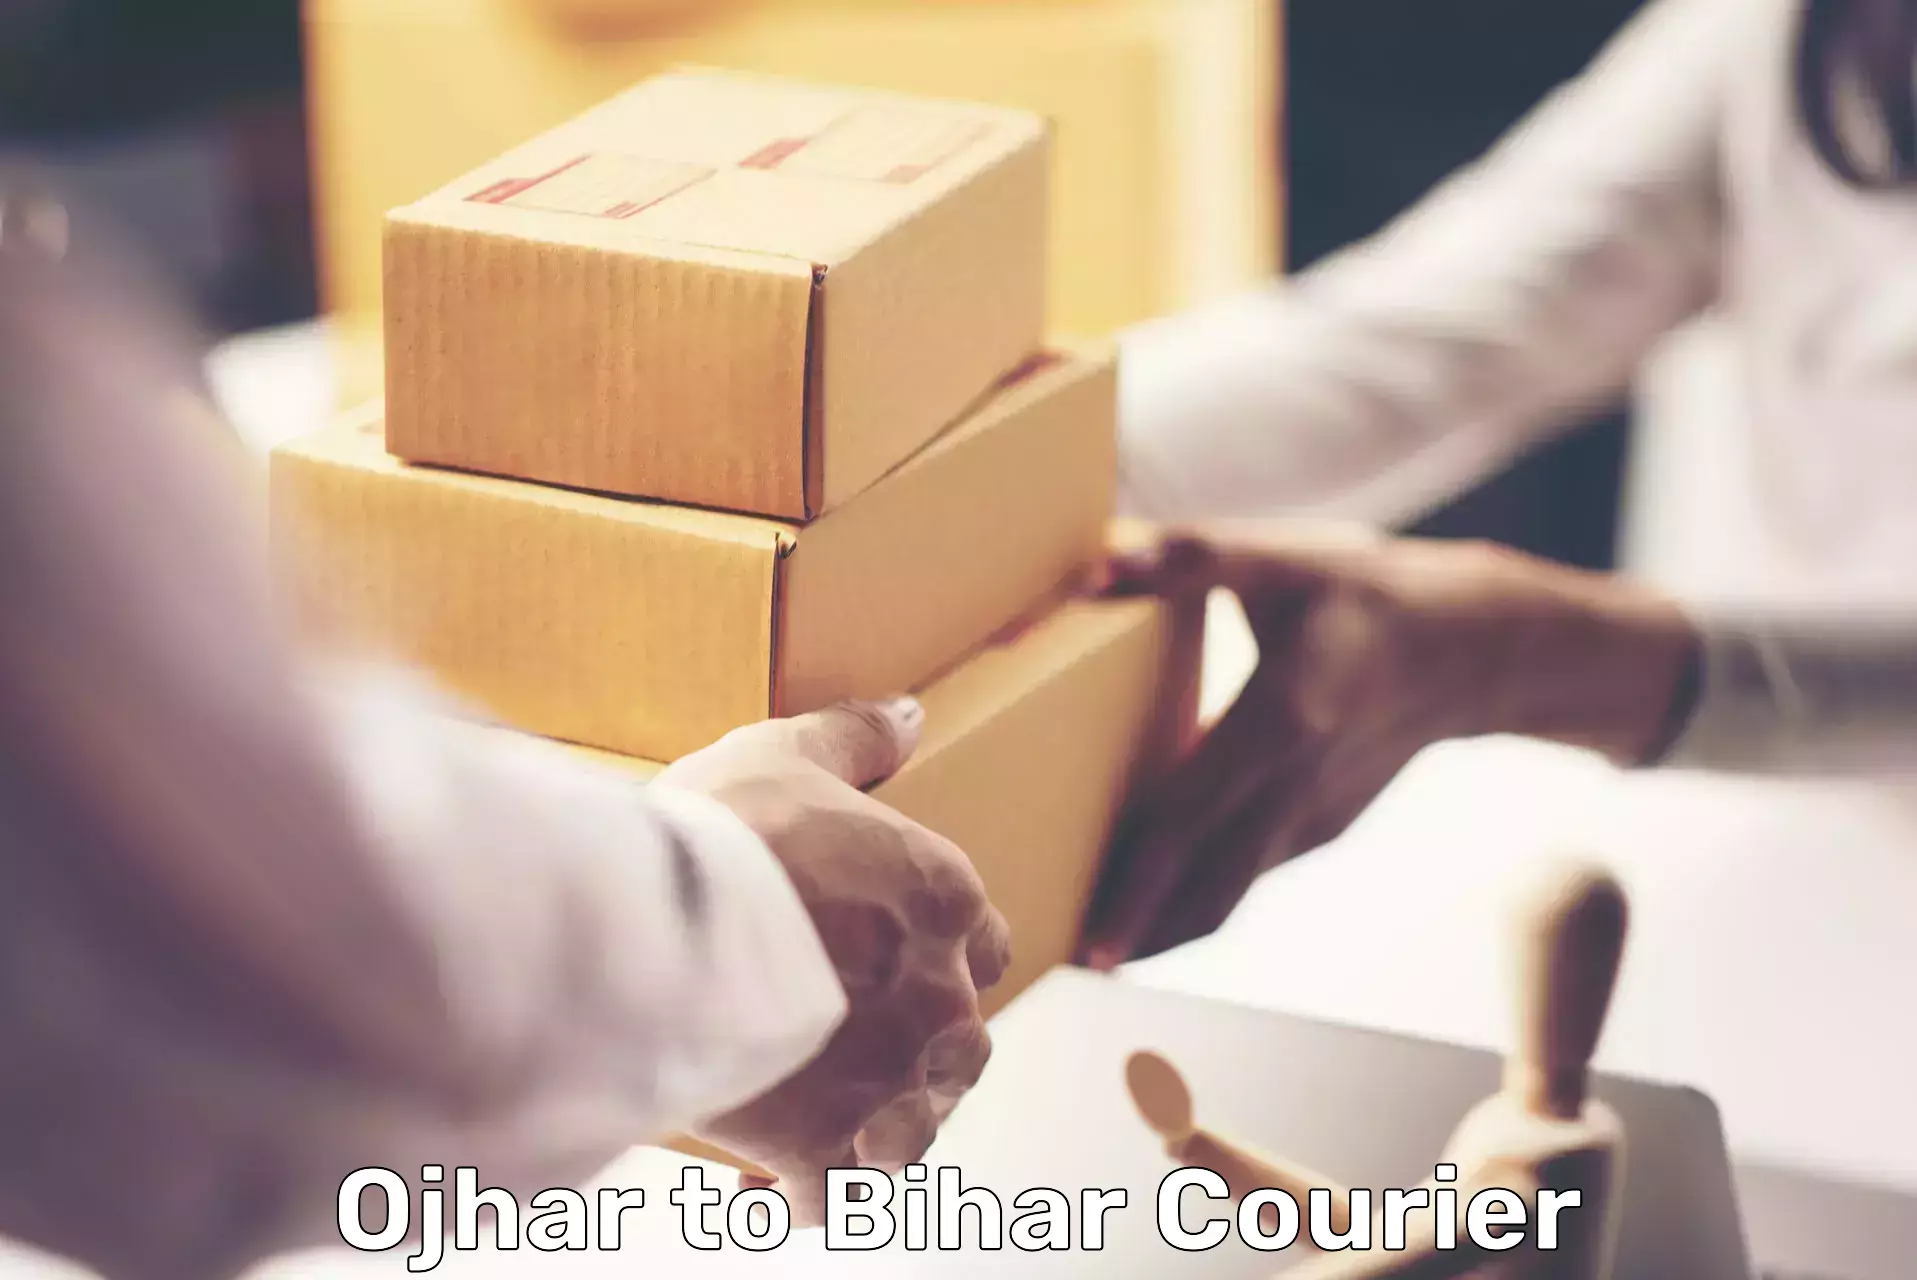 Efficient package consolidation Ojhar to Bihar